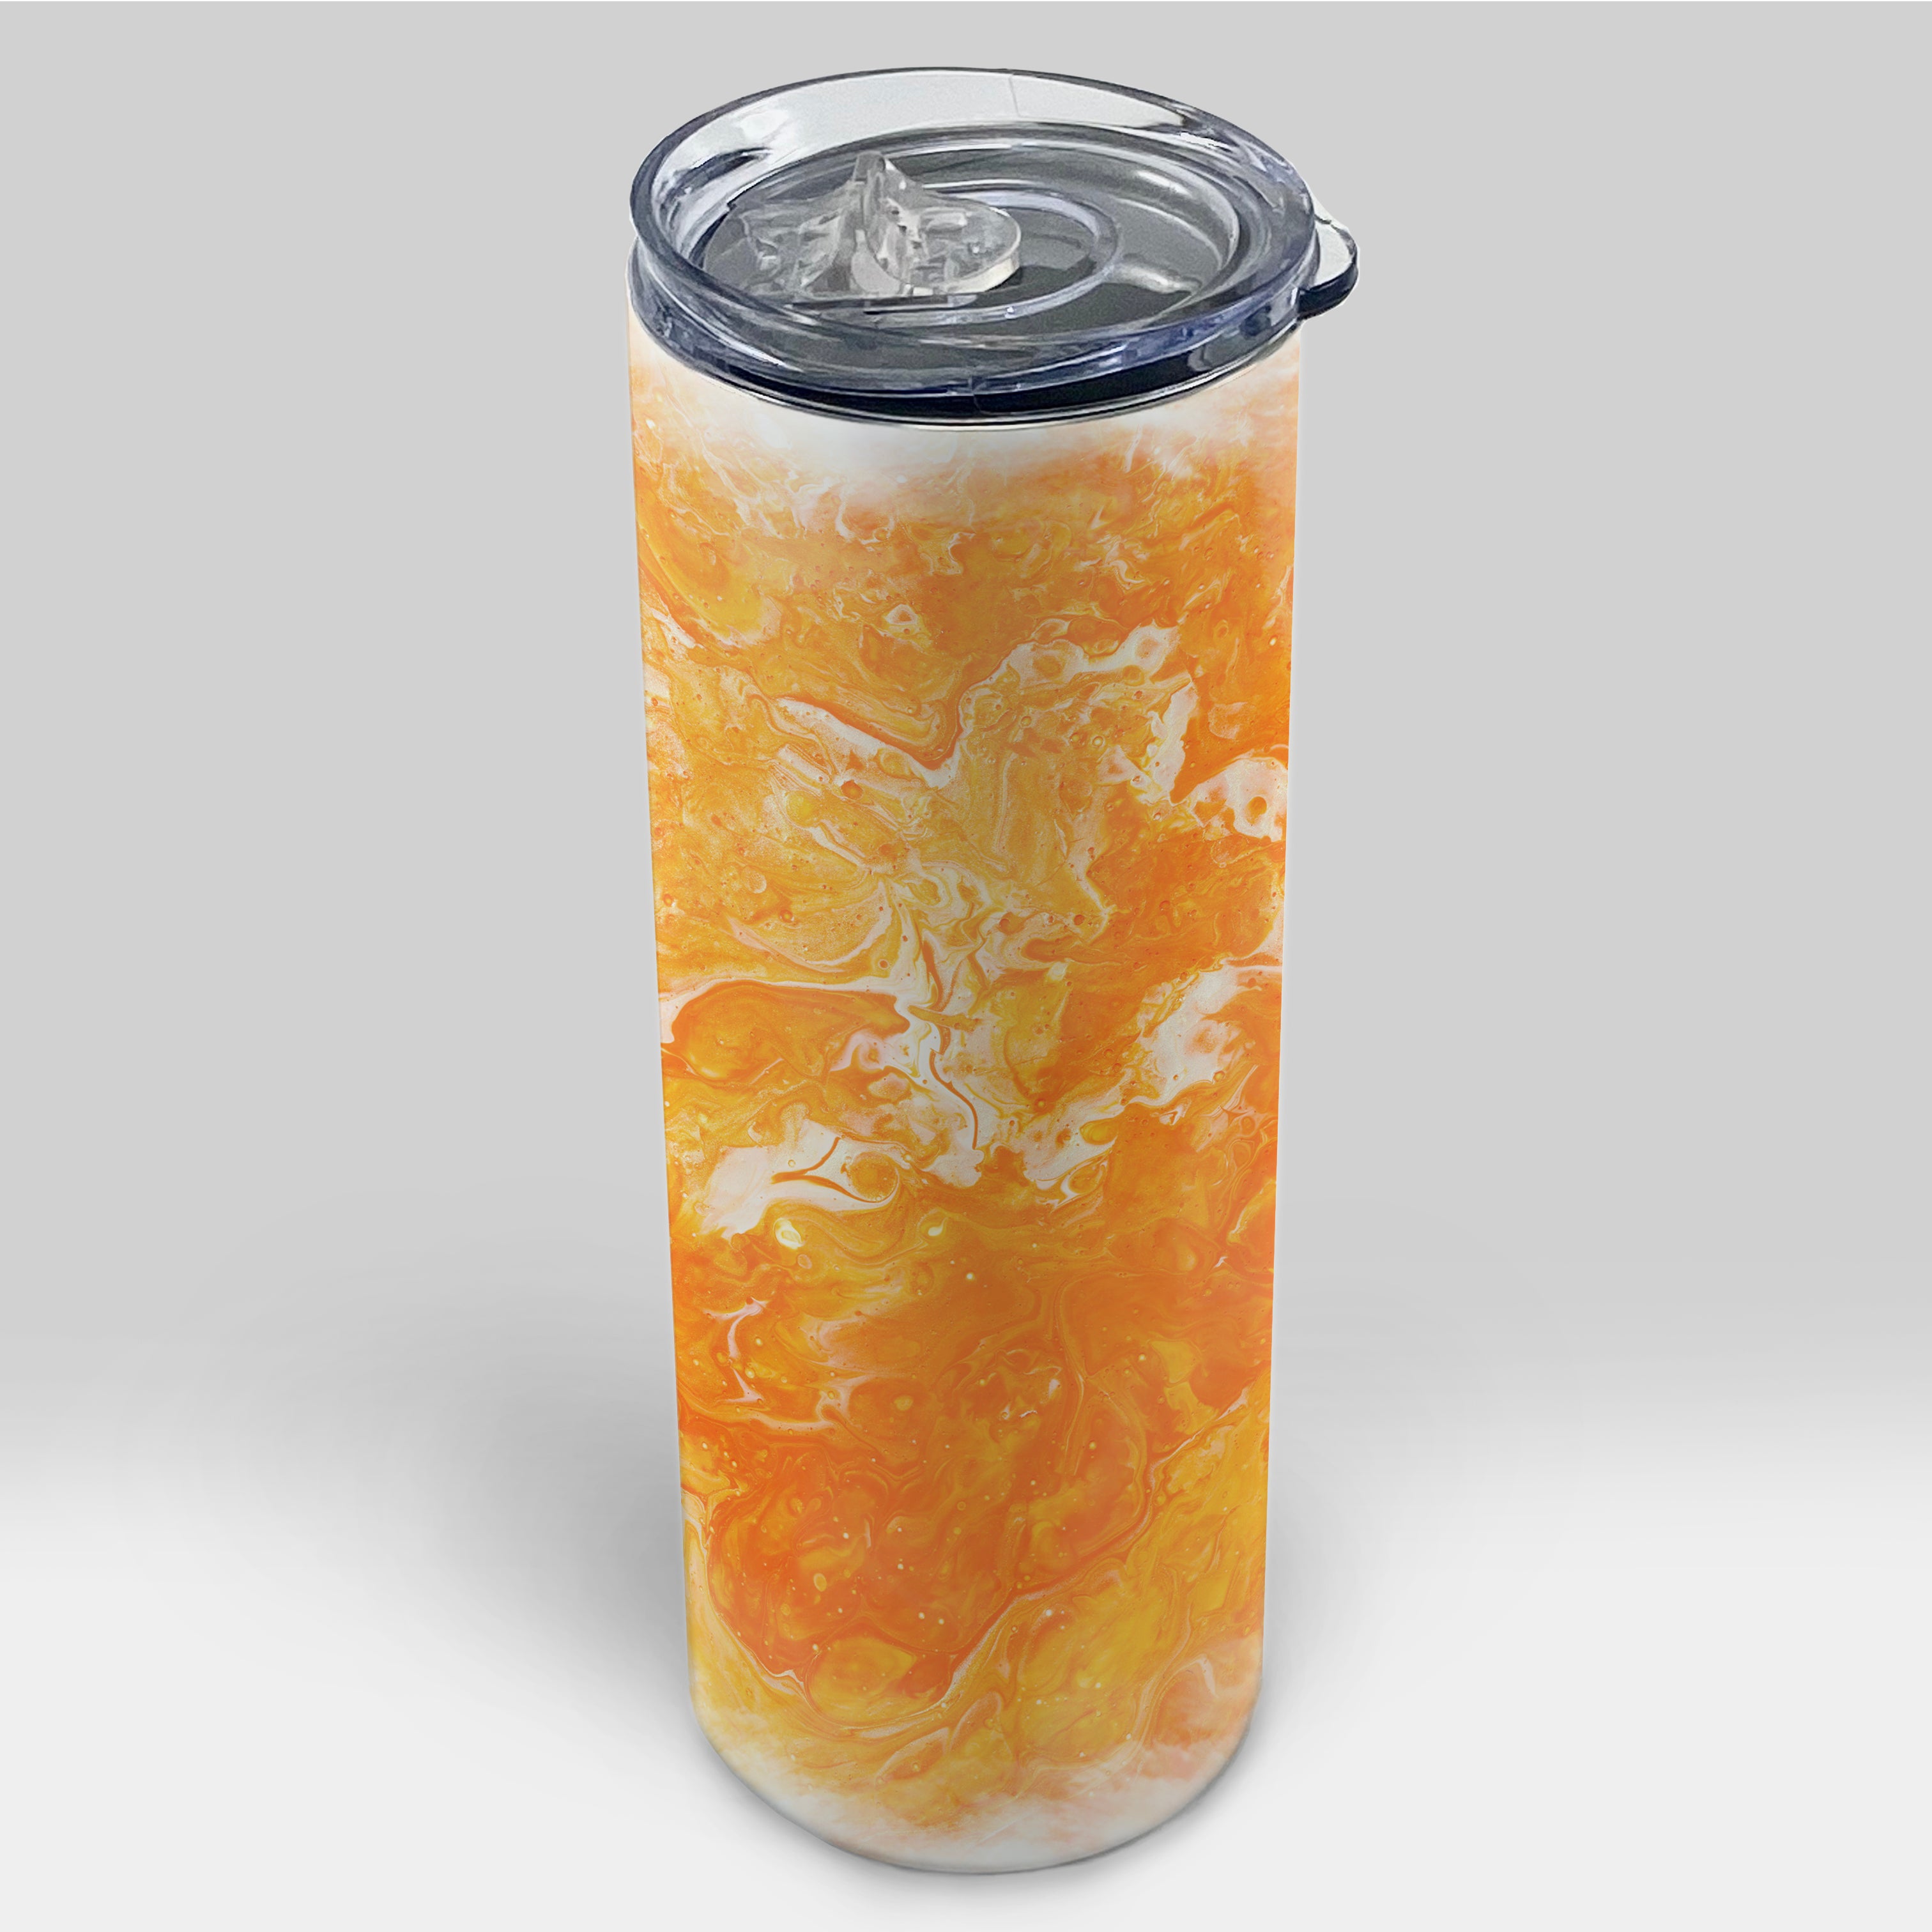 Trend Setters Original (Orange Marble) 20oz Stainless Steel Travel Tumbler with Straw